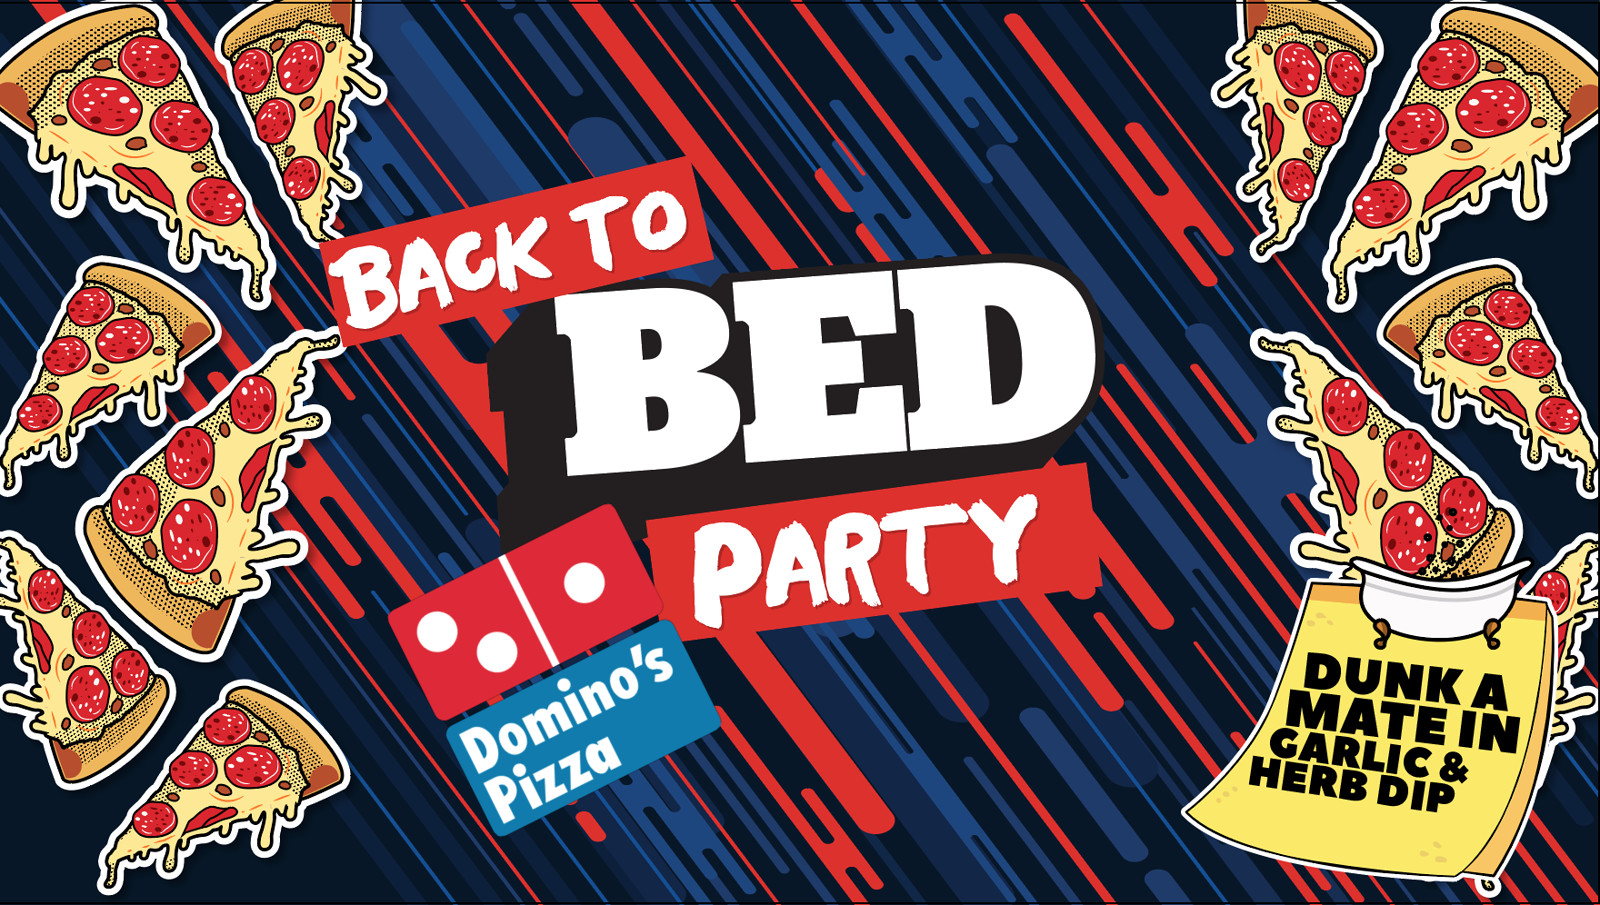 BED Bristol: Back to BED Dominos Pizza Party at Gravity Nightclub